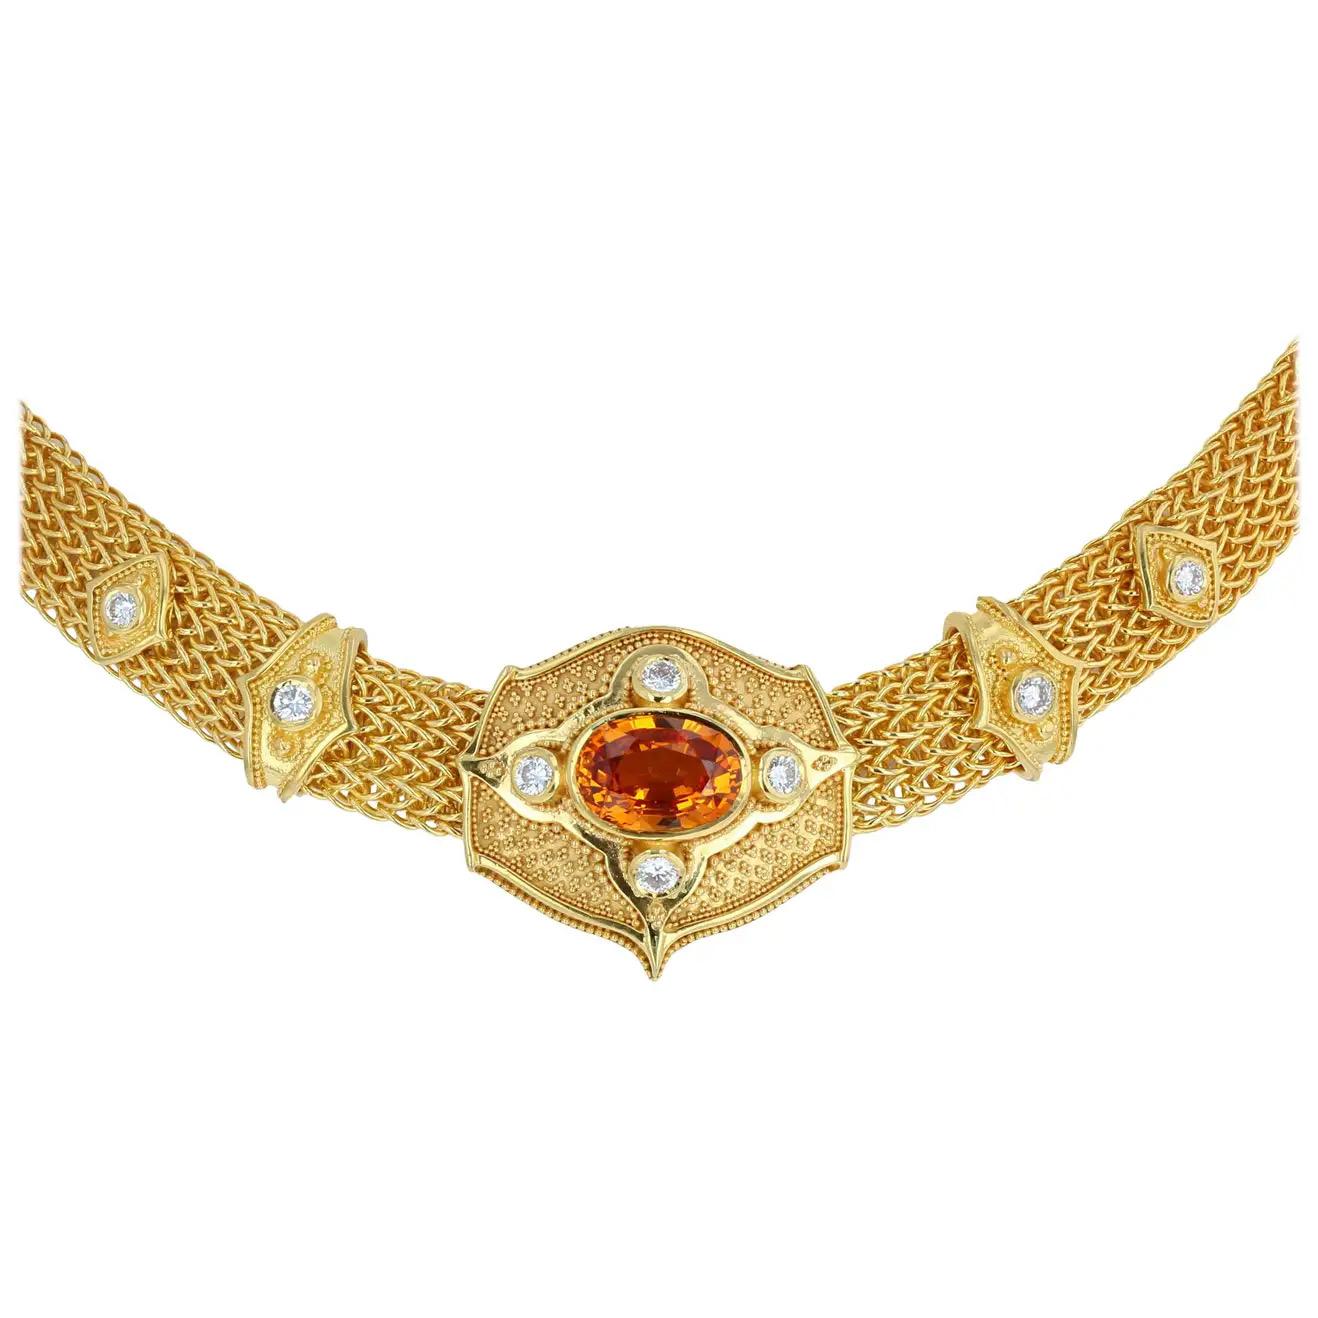 From the Kent Raible limited edition Studio Collection, we present The 'Golden Sapphire Choker Necklace' featuring Yellow - Golden Sapphires and Diamonds, accented with fine Gold Granulation.  Raible's hand woven chains are legendary! They are